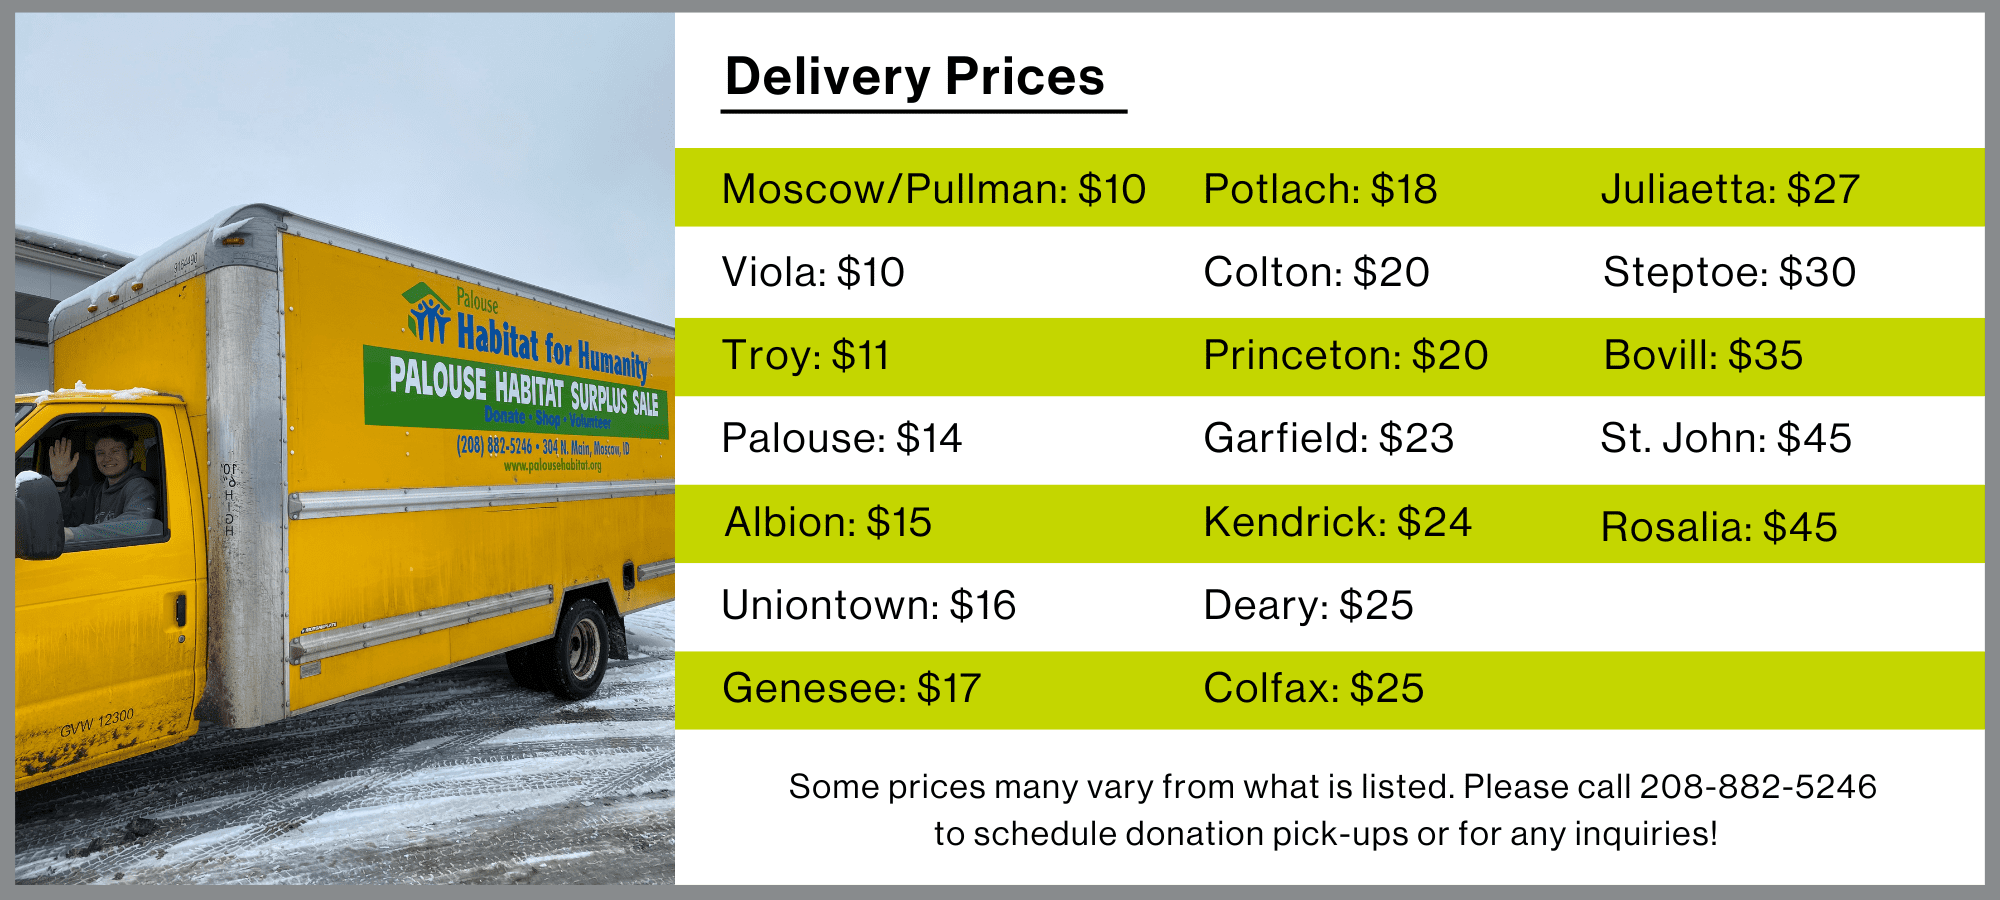 Delivery Prices-3